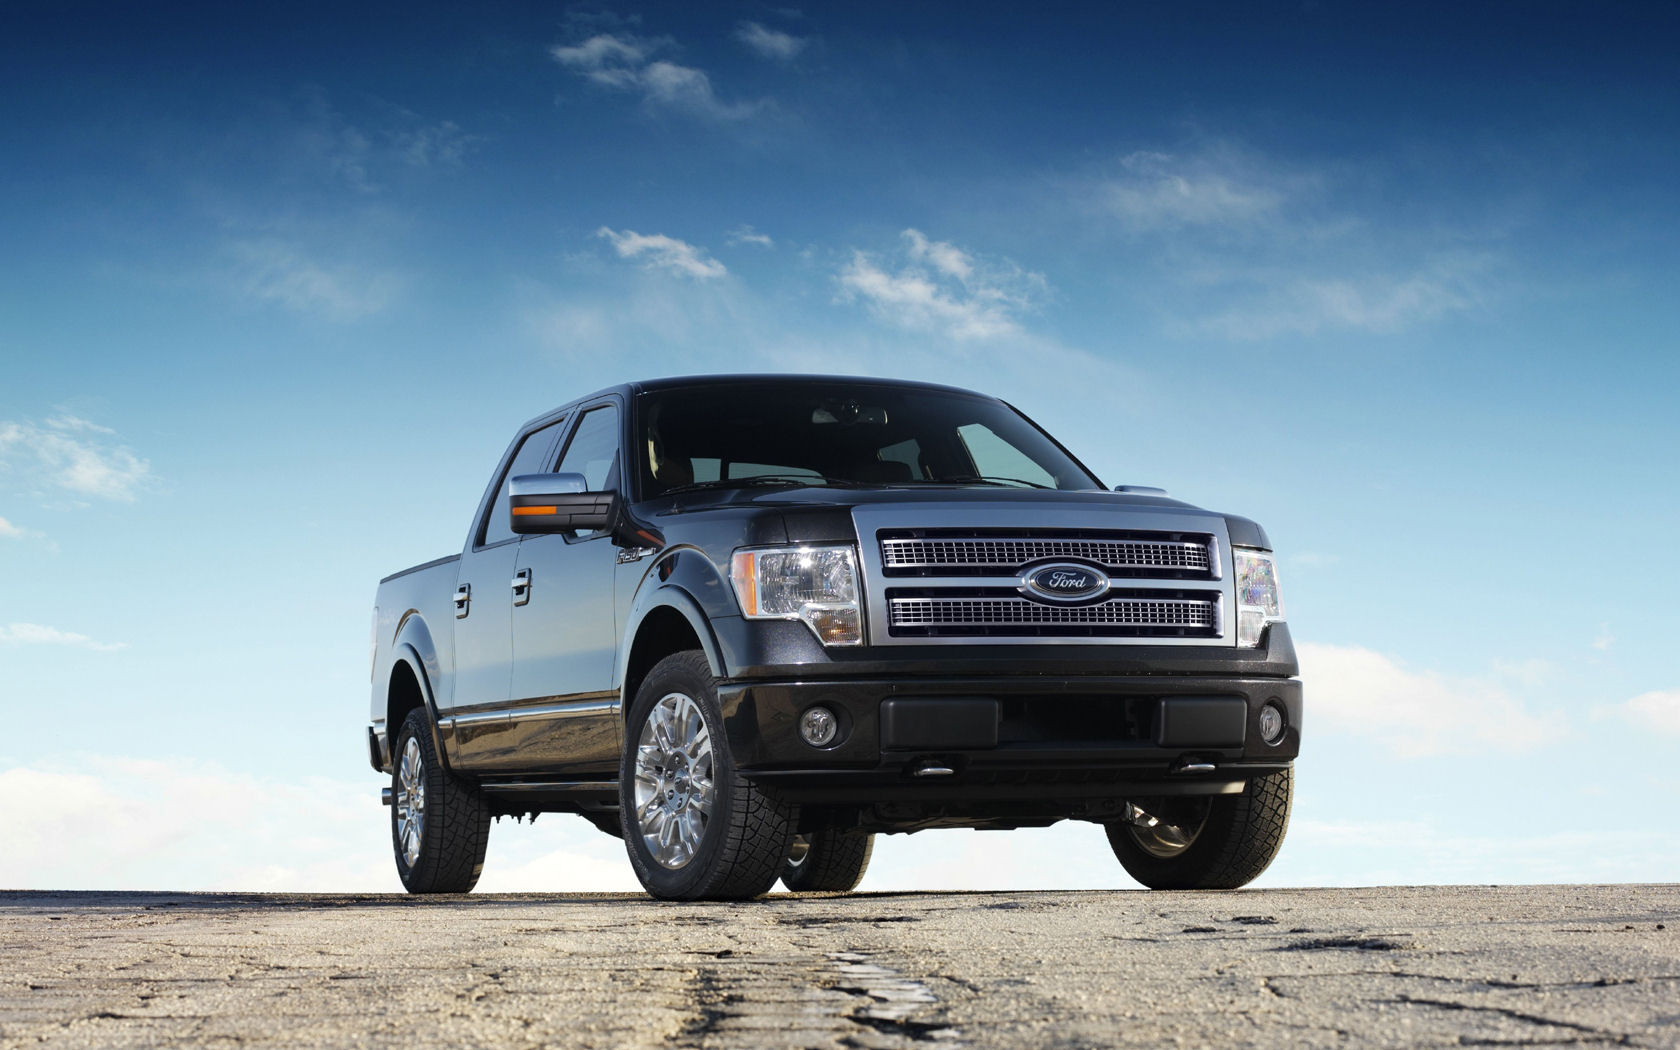 Ford Ford F150 Ford F150 Desktop Wallpapers Widescreen Wallpaper 1680x1050